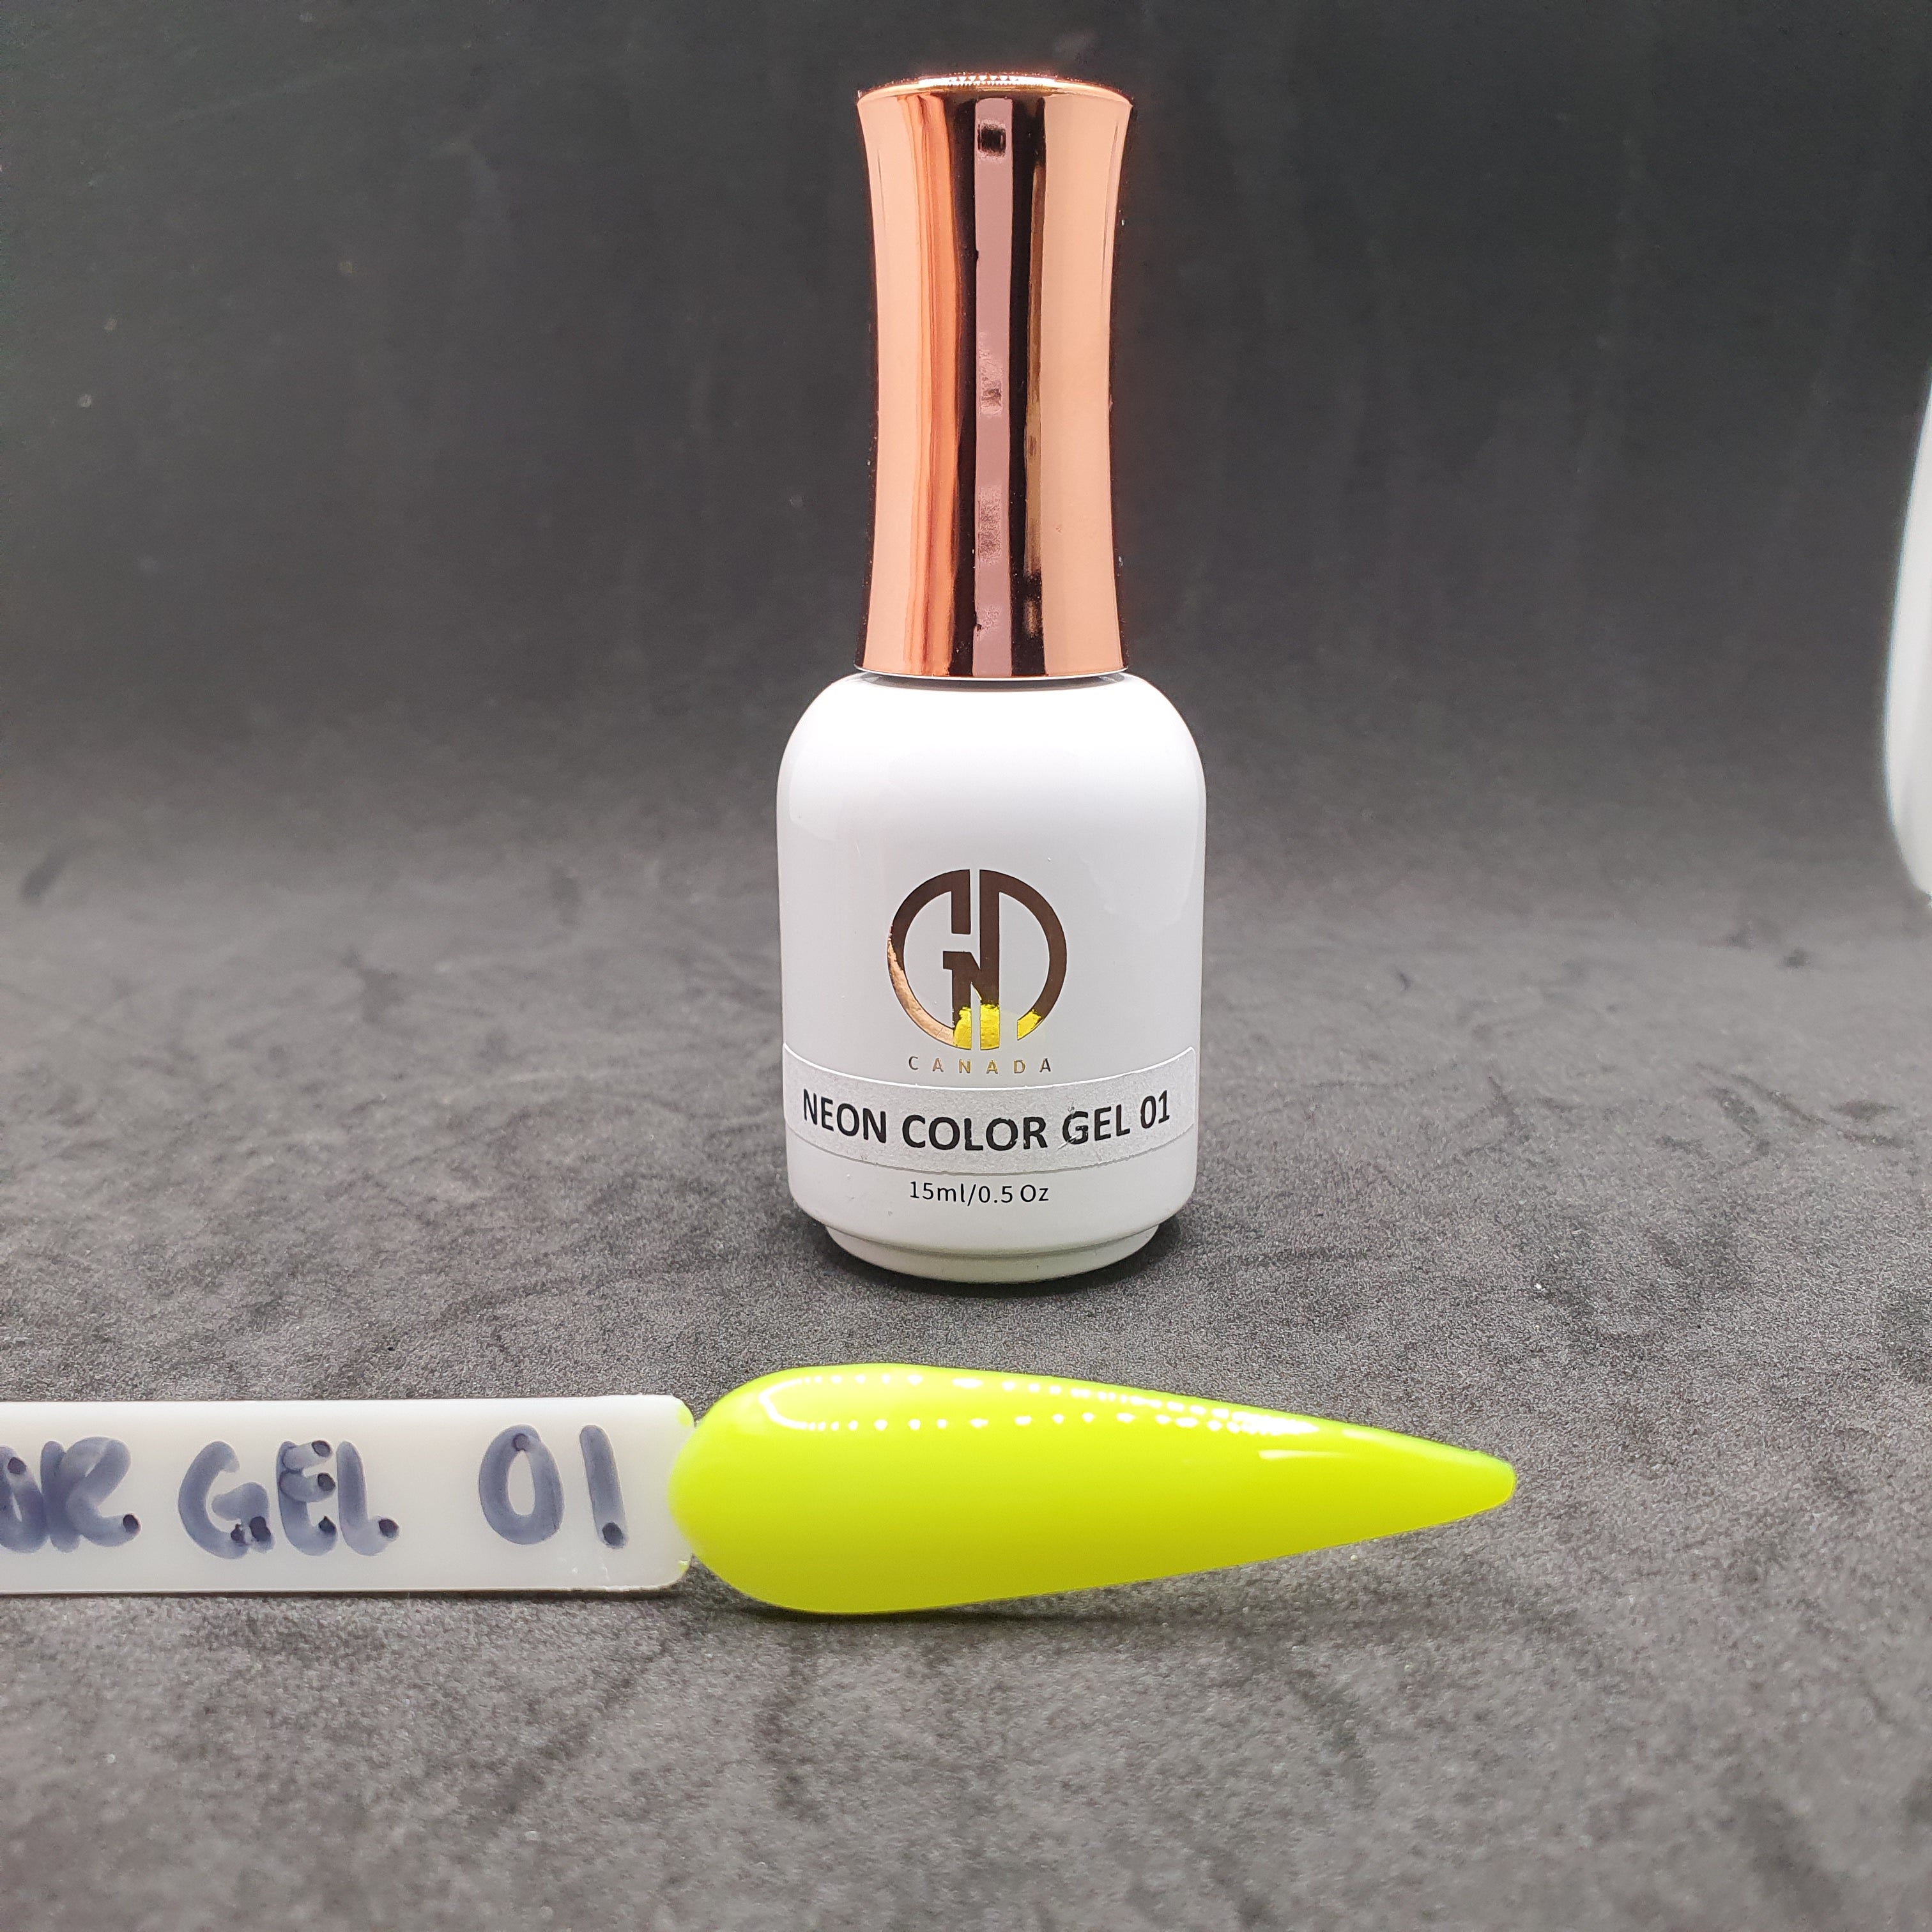 NEW - GND NEON GEL COLOR - 01